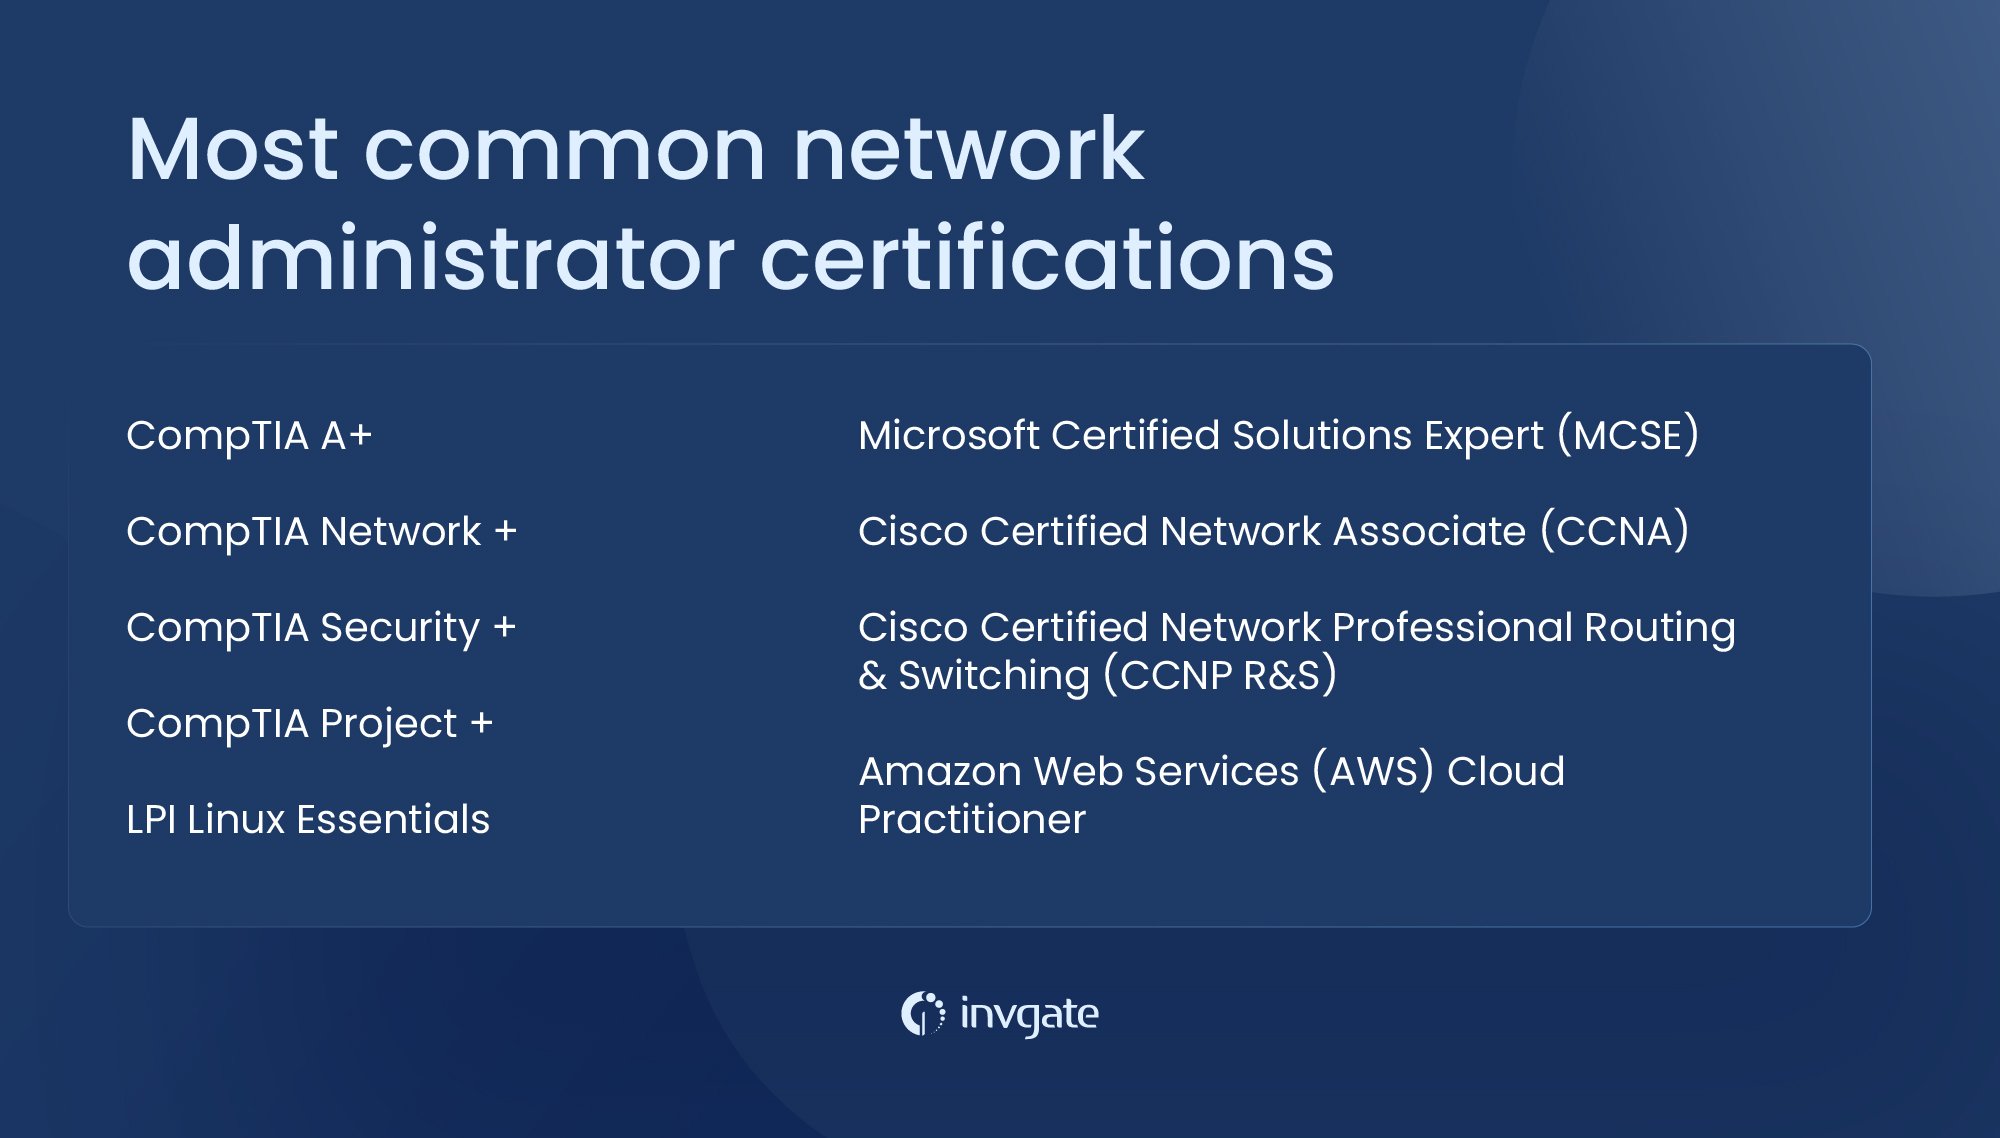 The following is a list of some of the most common certifications associated with network administrators